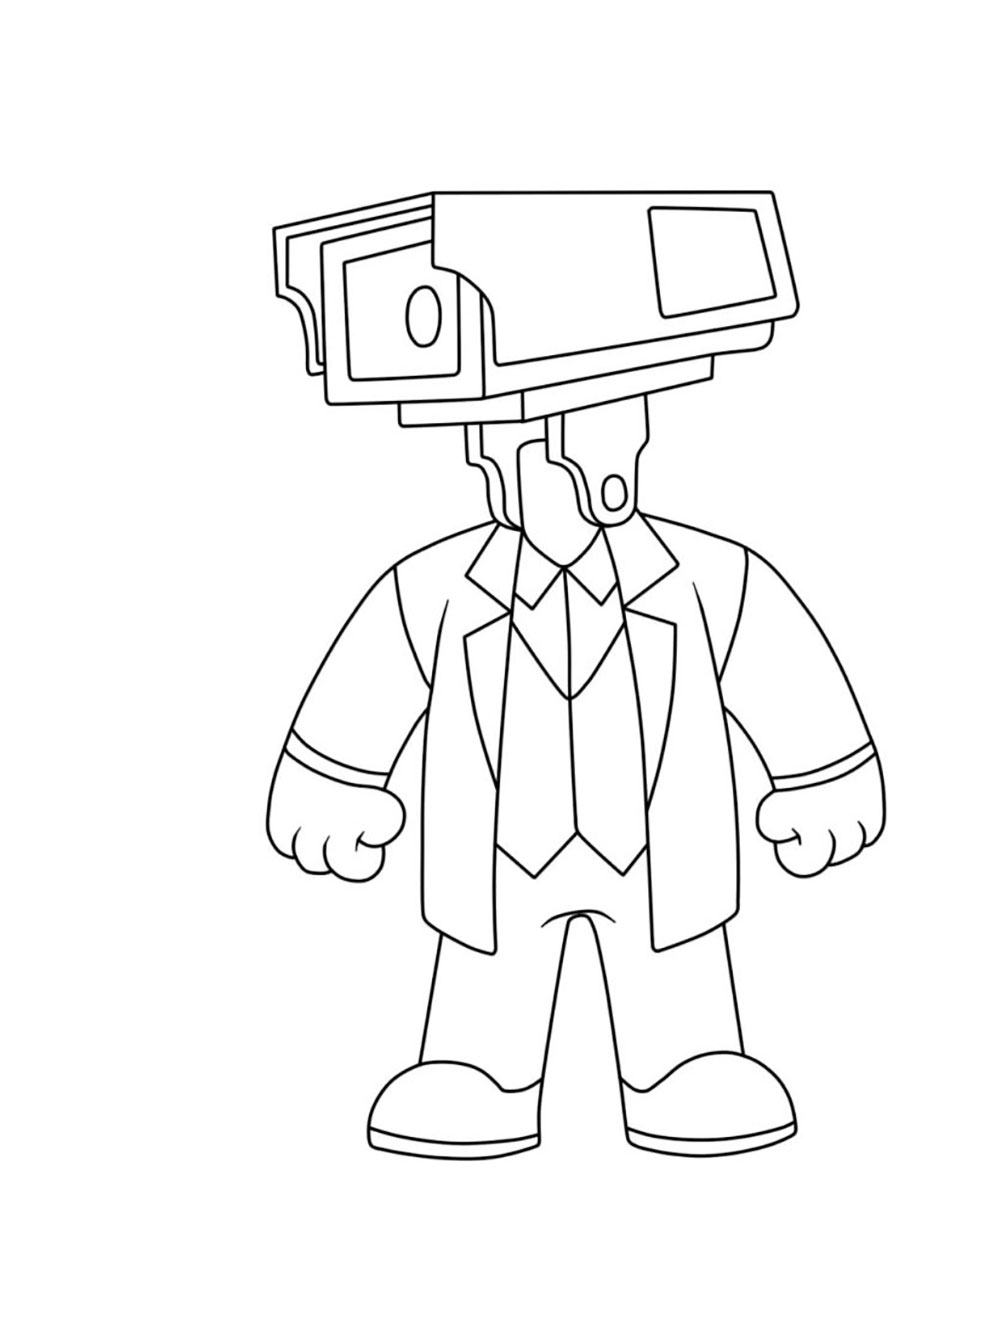 Cameraman coloring pages